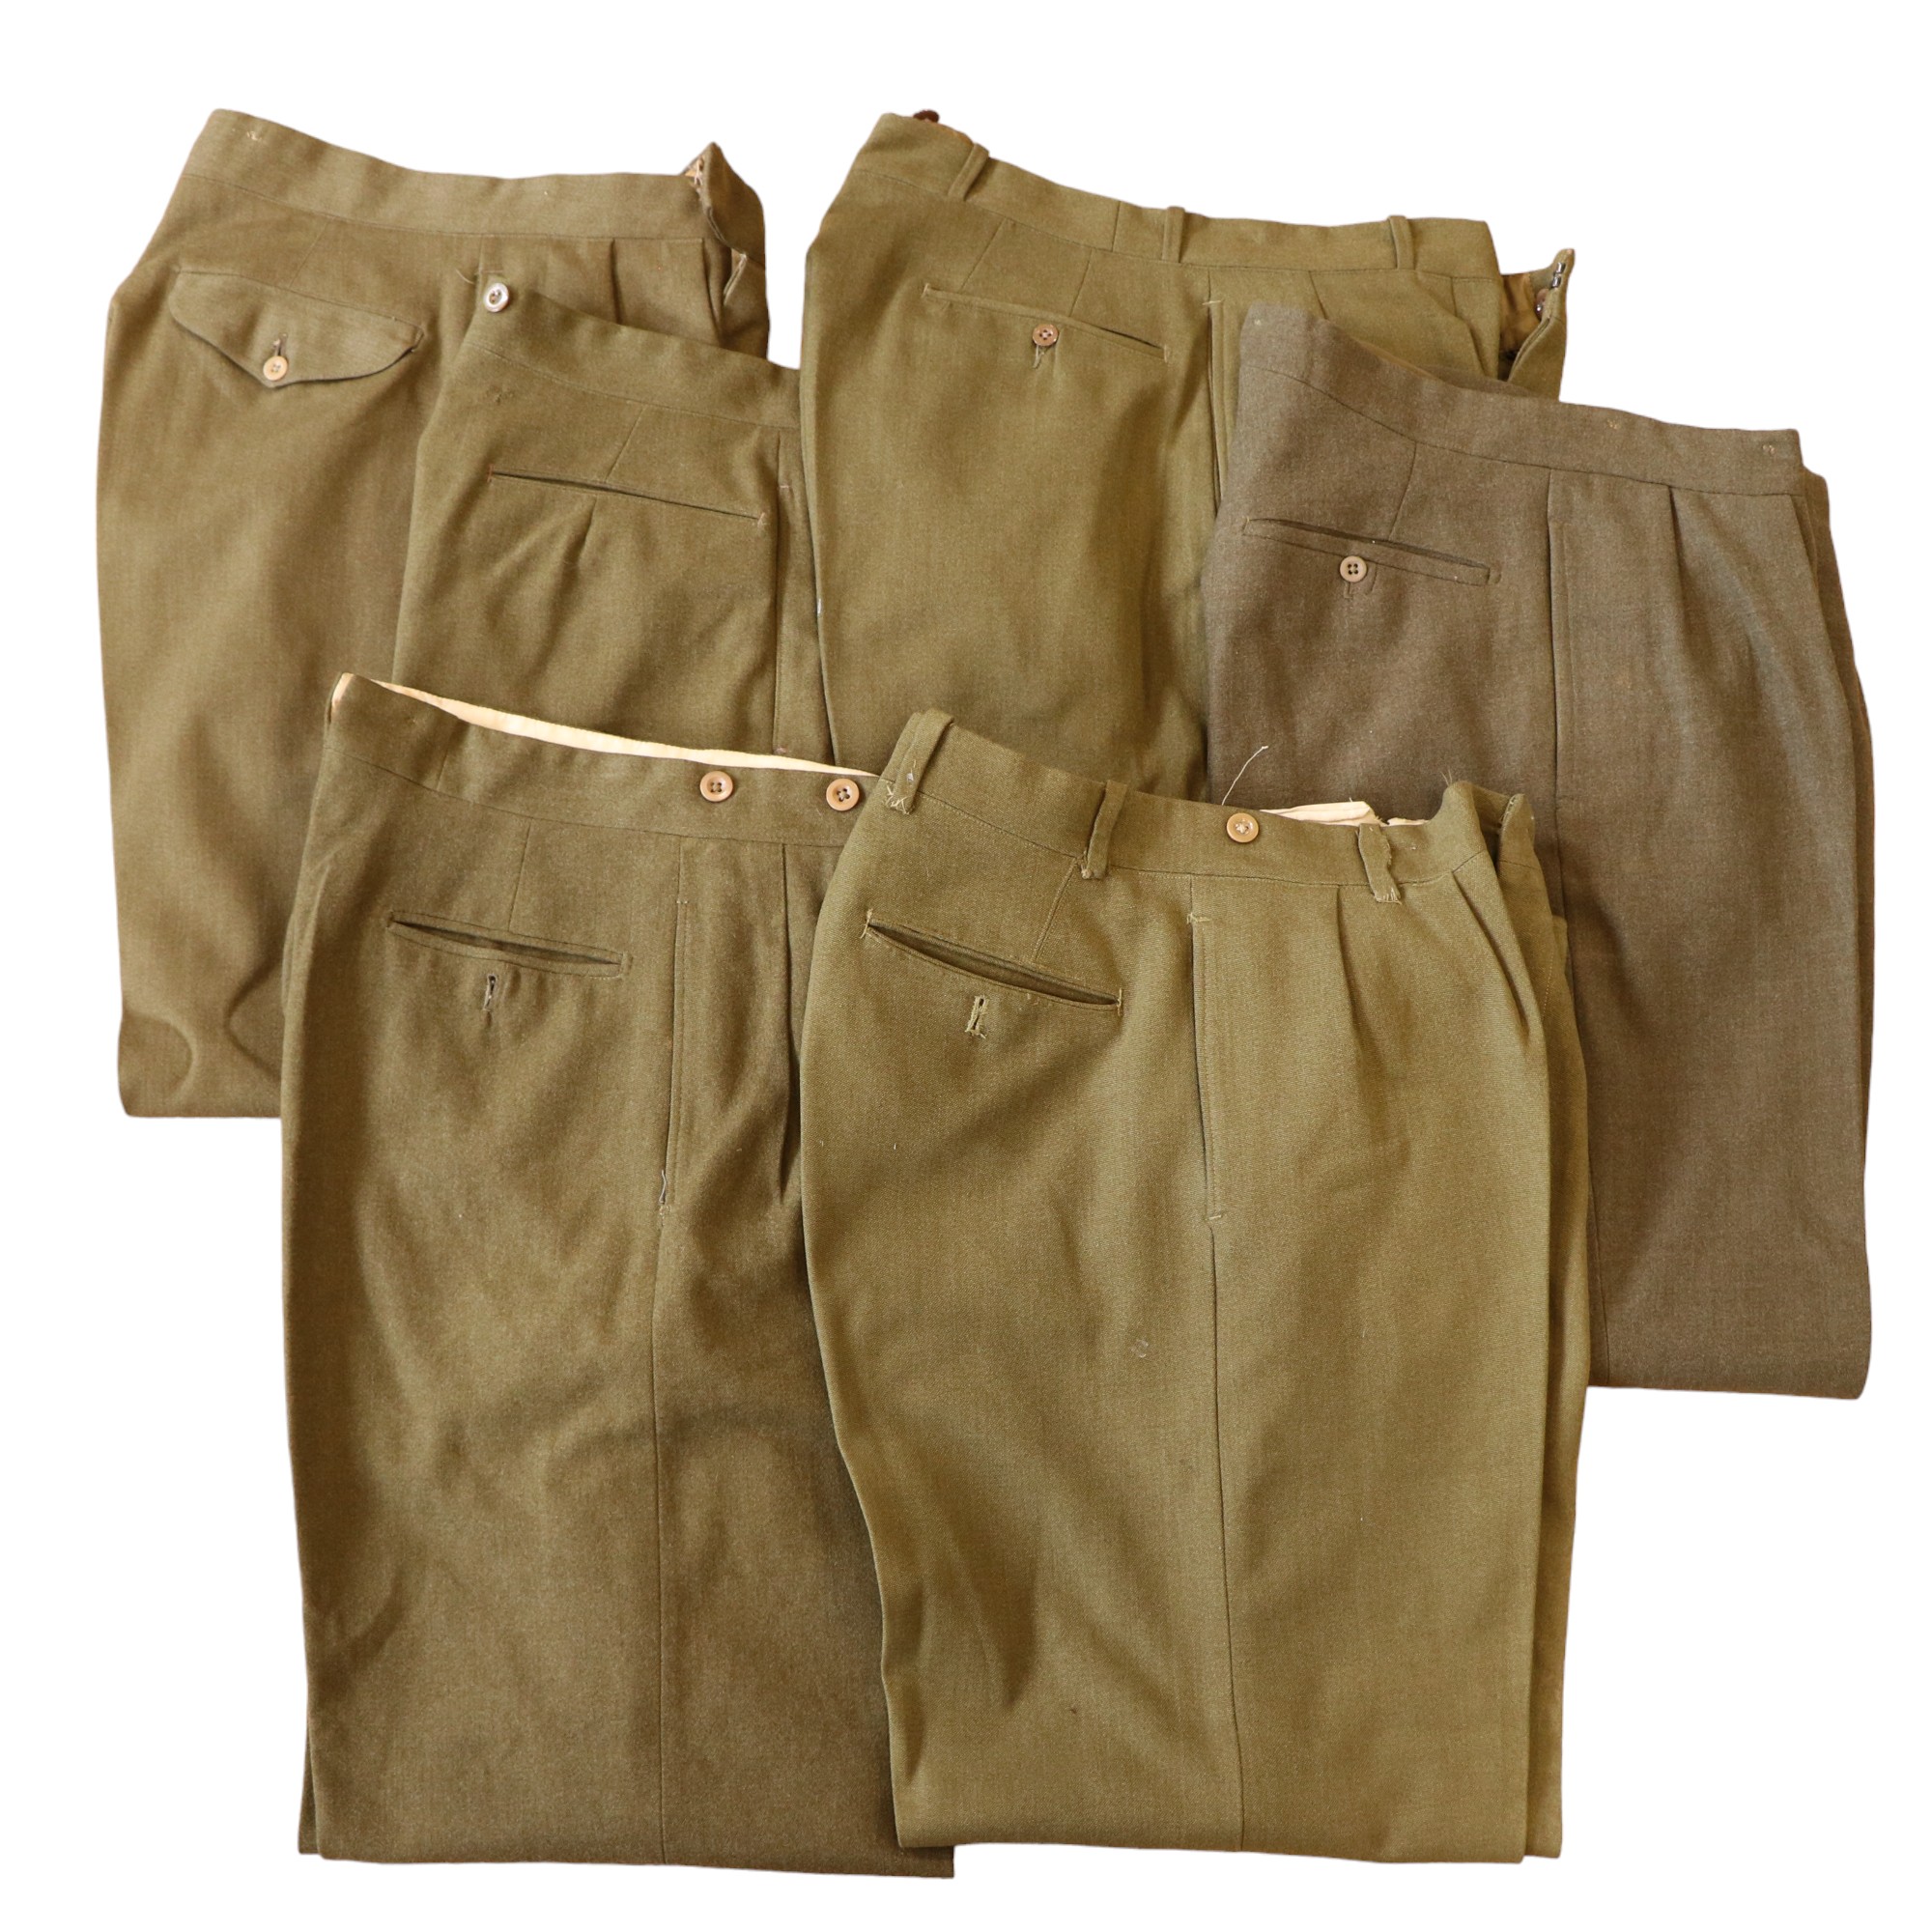 Six pairs of 1940s officers' Service Dress trousers